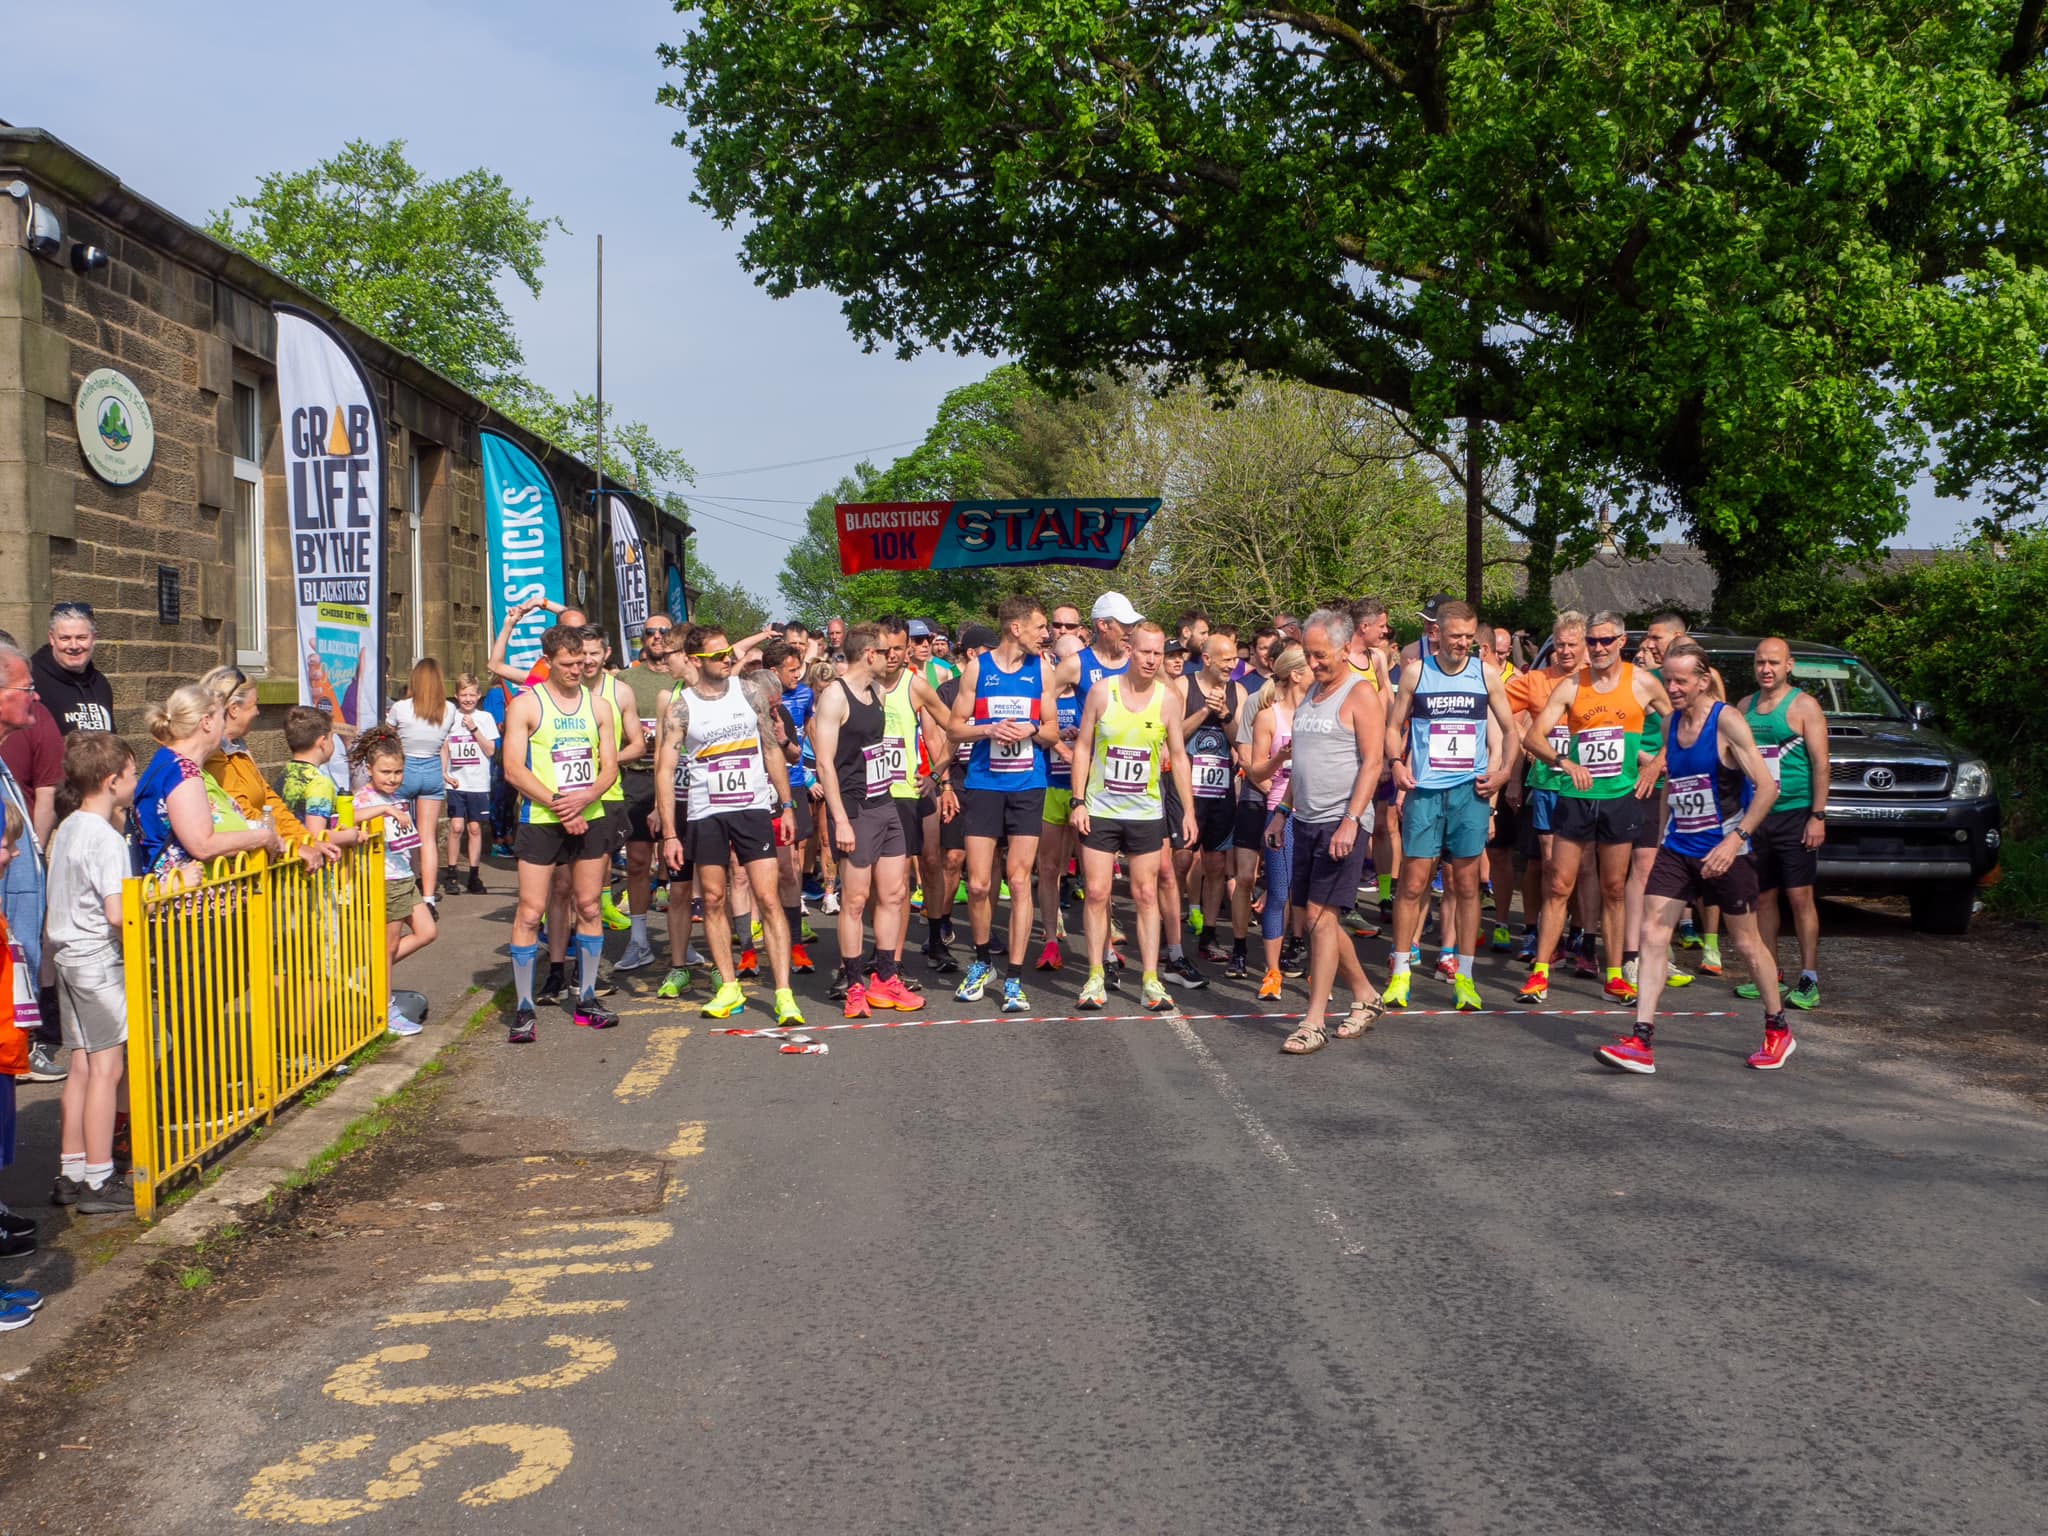 222 Runners Complete The 15th Annual Blacksticks 10K